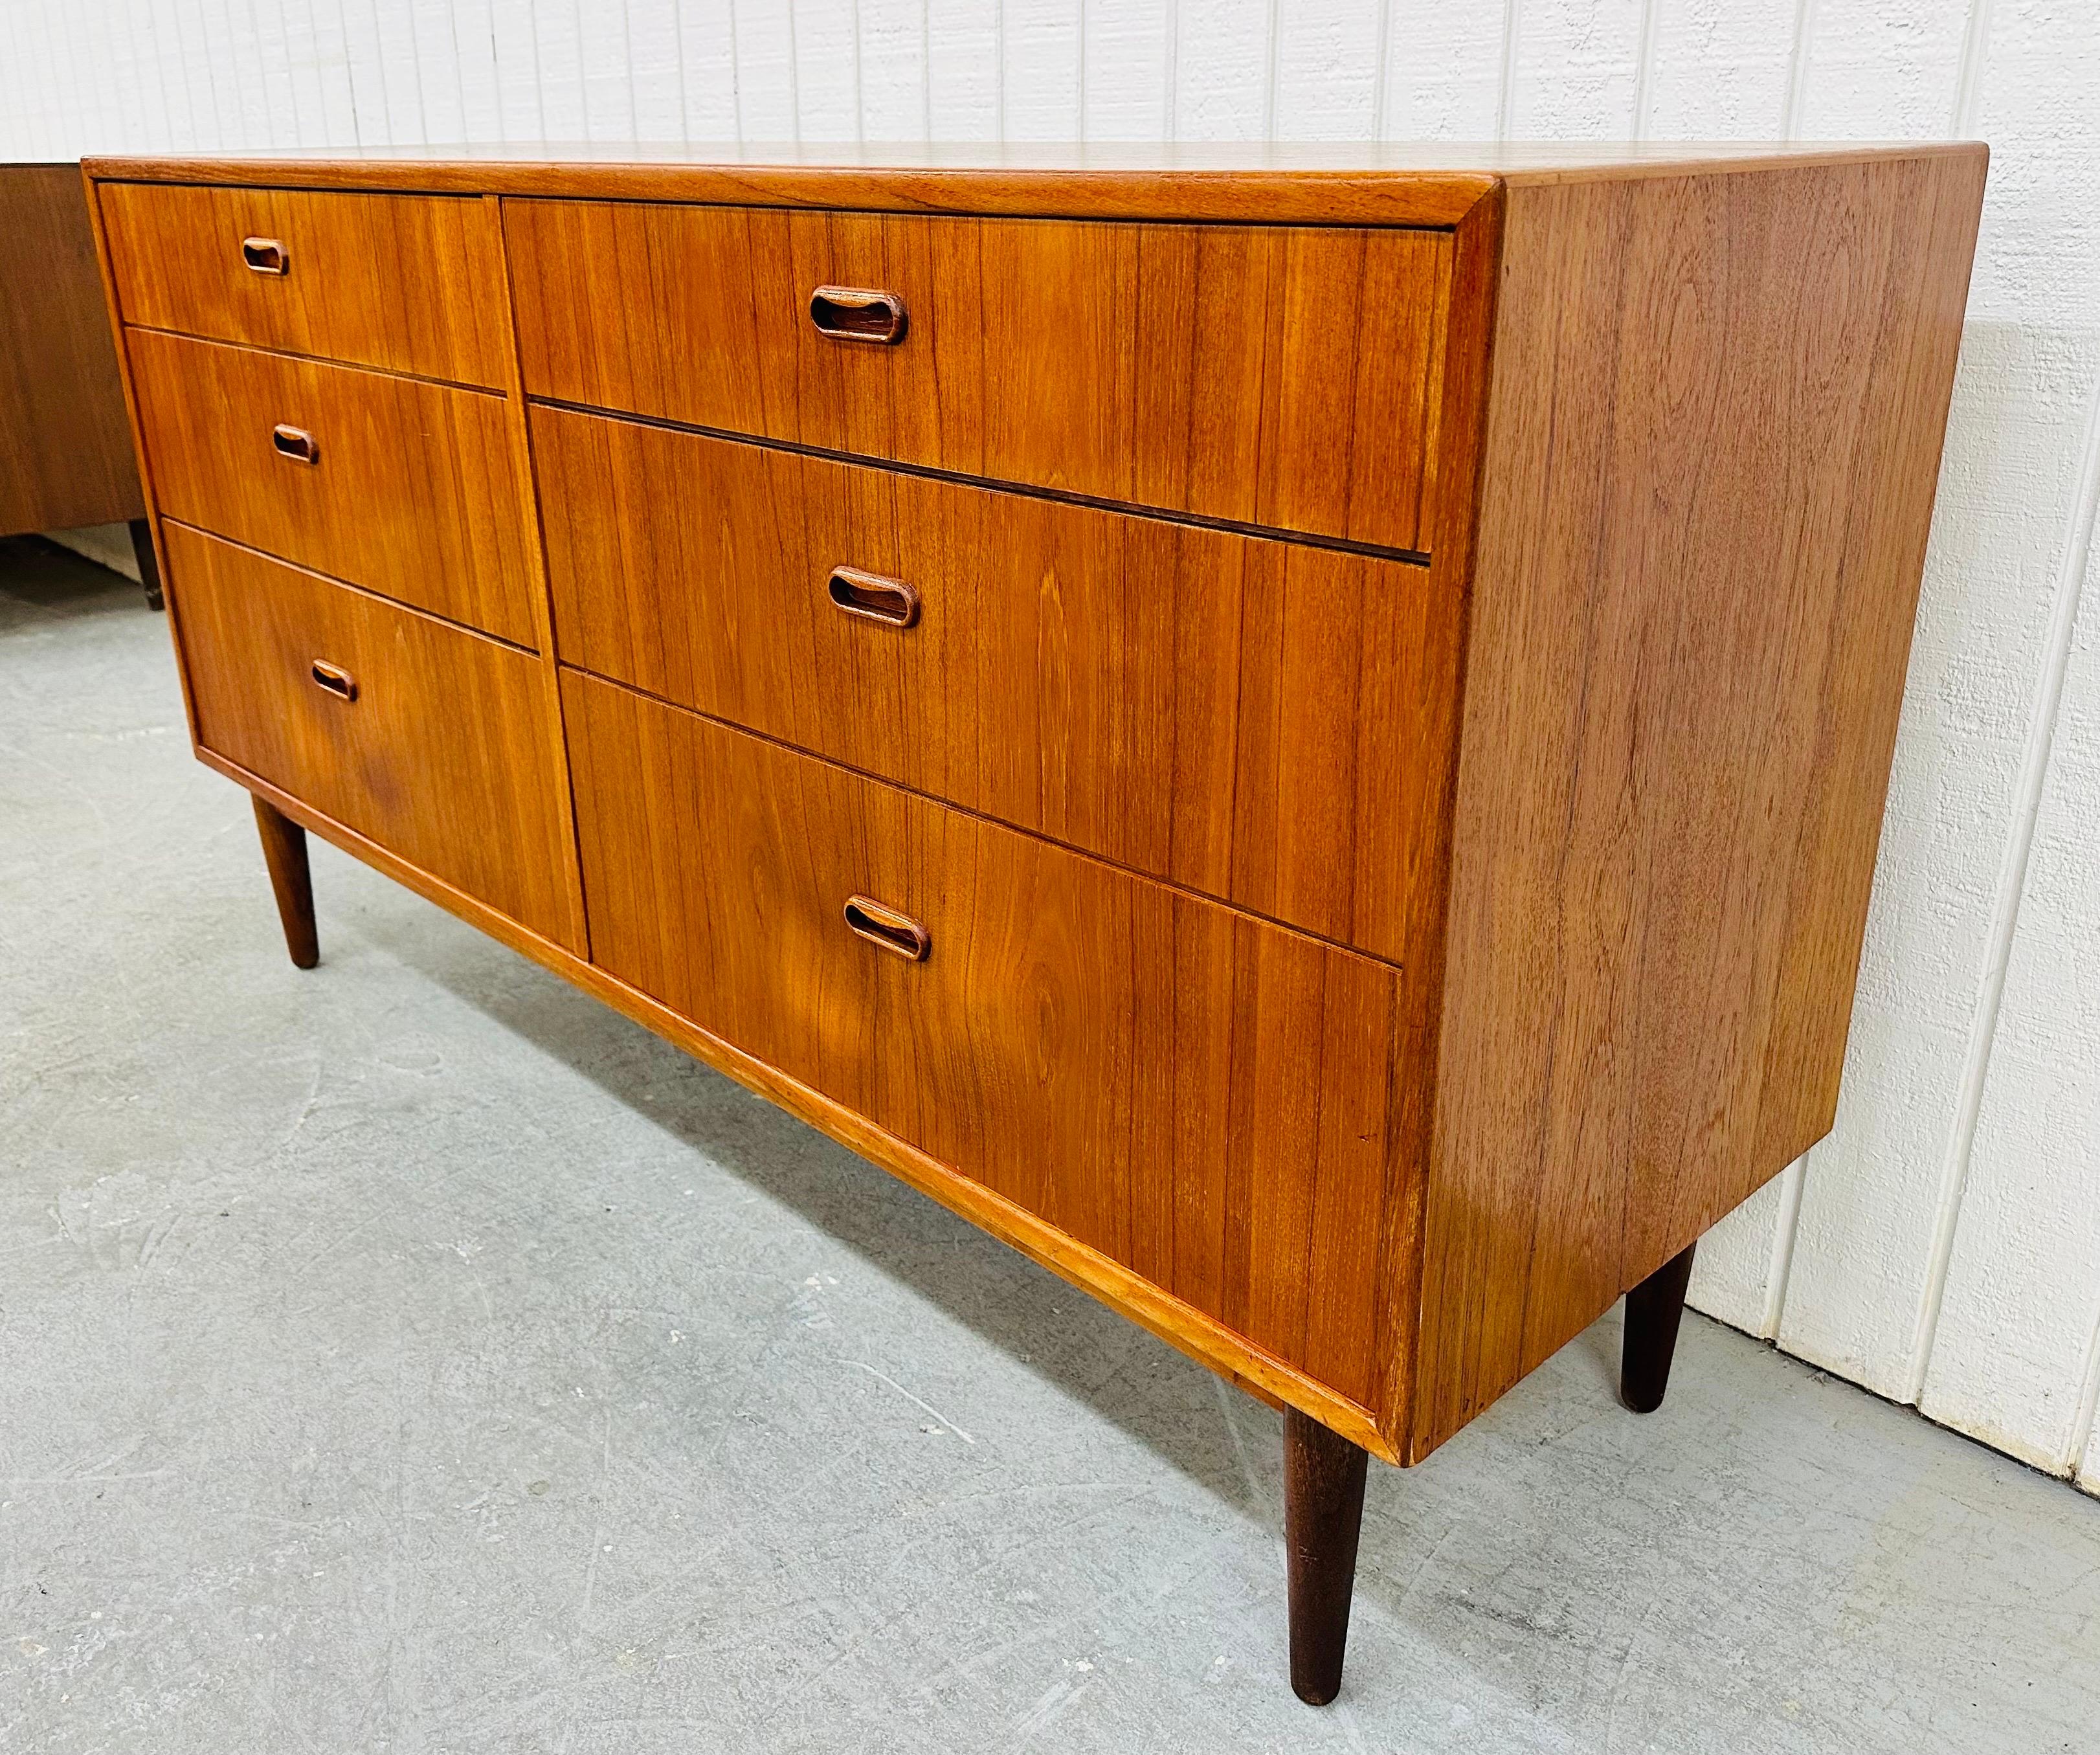 This listing is for a Mid-Century Danish Modern Teak Double Dresser. Featuring a straight line design, six large drawers for storage, recessed wooden pulls, modern legs, and a beautiful teak finish! This is an exceptional combination of quality and